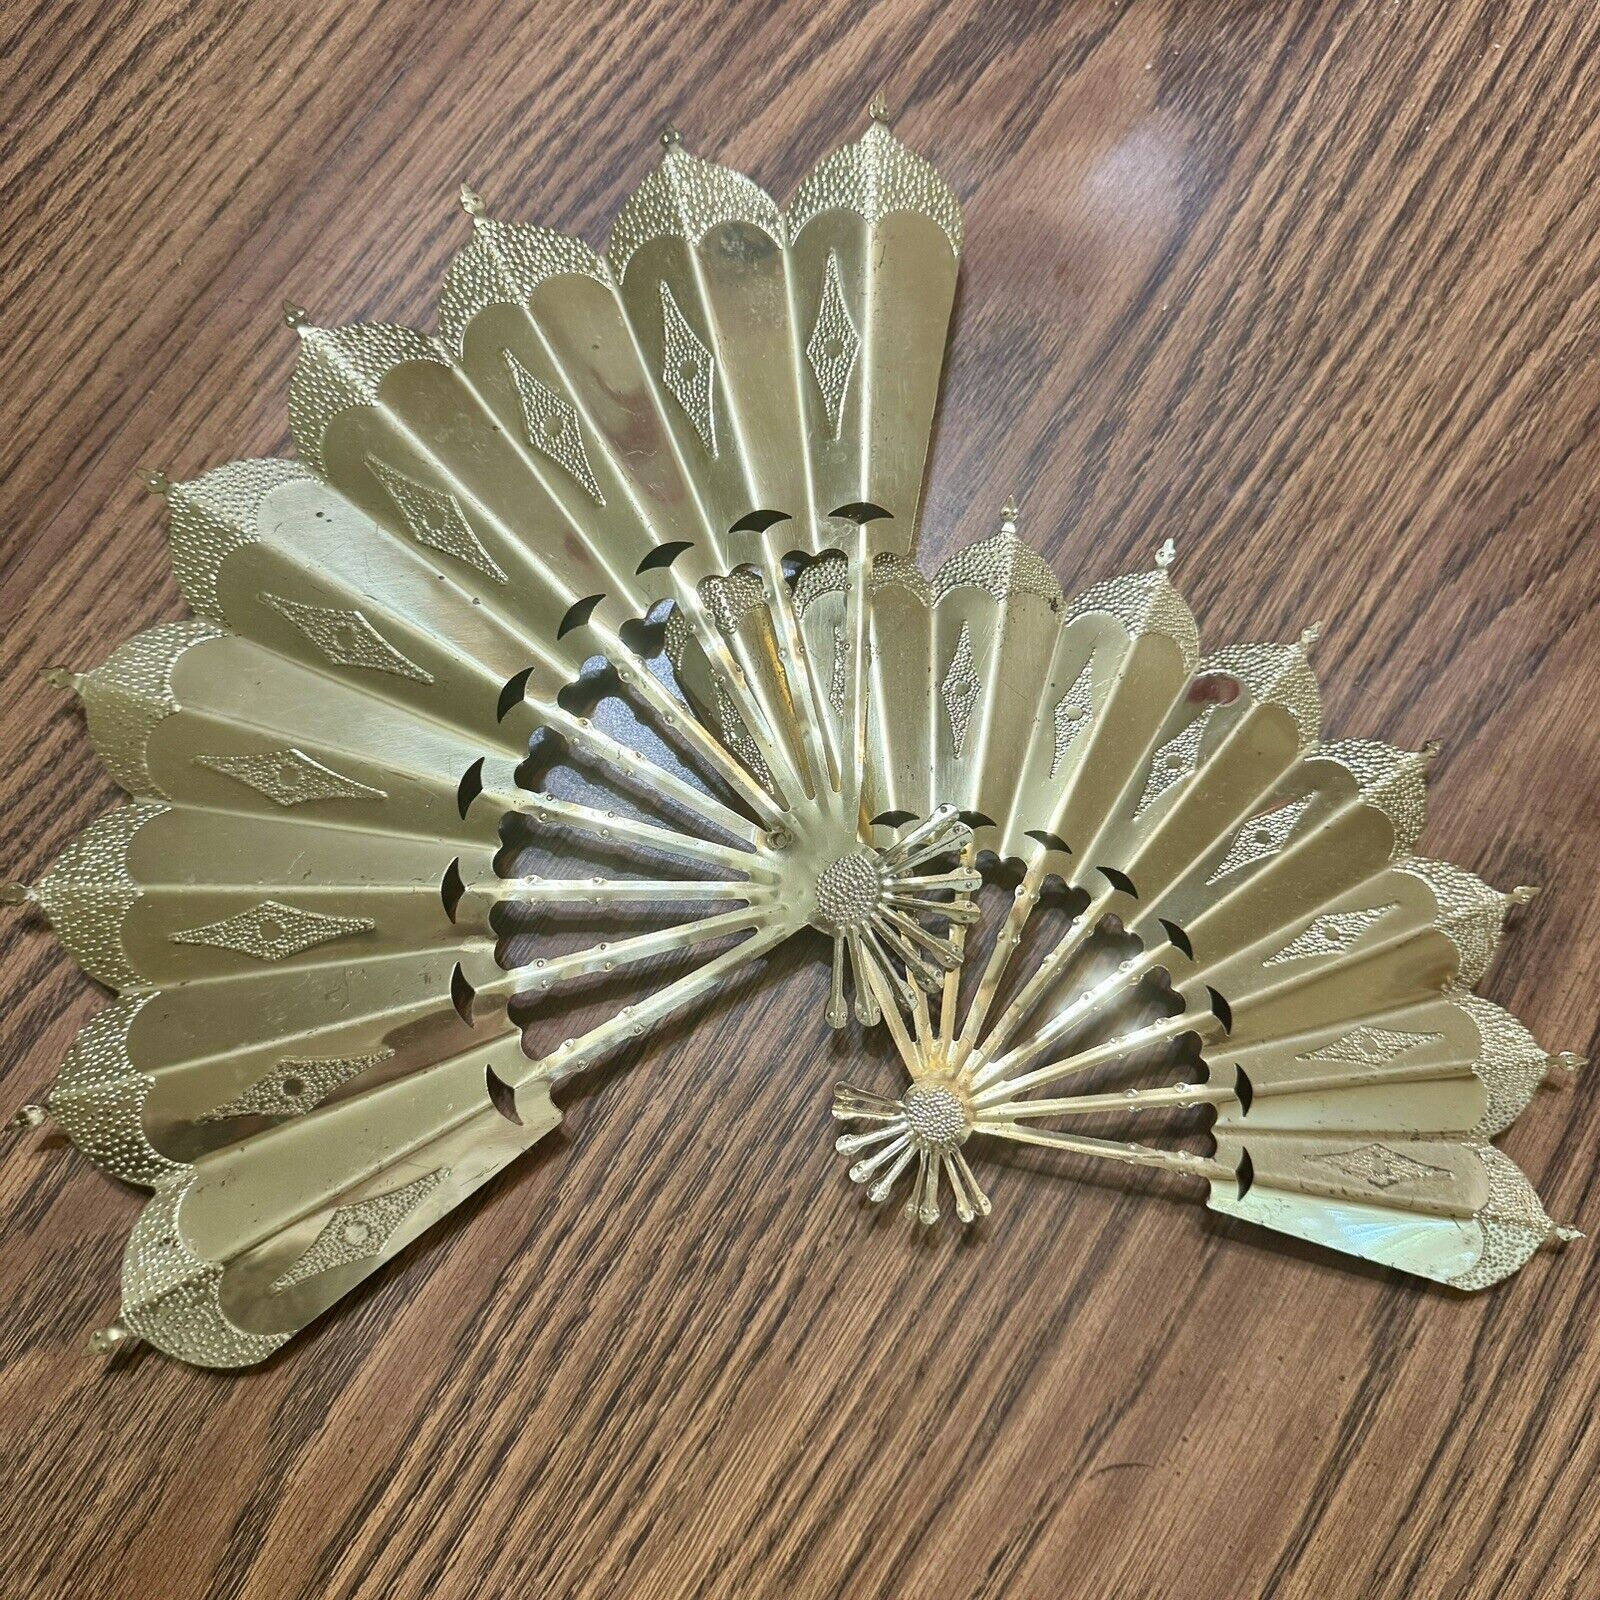 Vintage Home Interiors Metal Decorative Gold Tone Wall Fans Set of 2